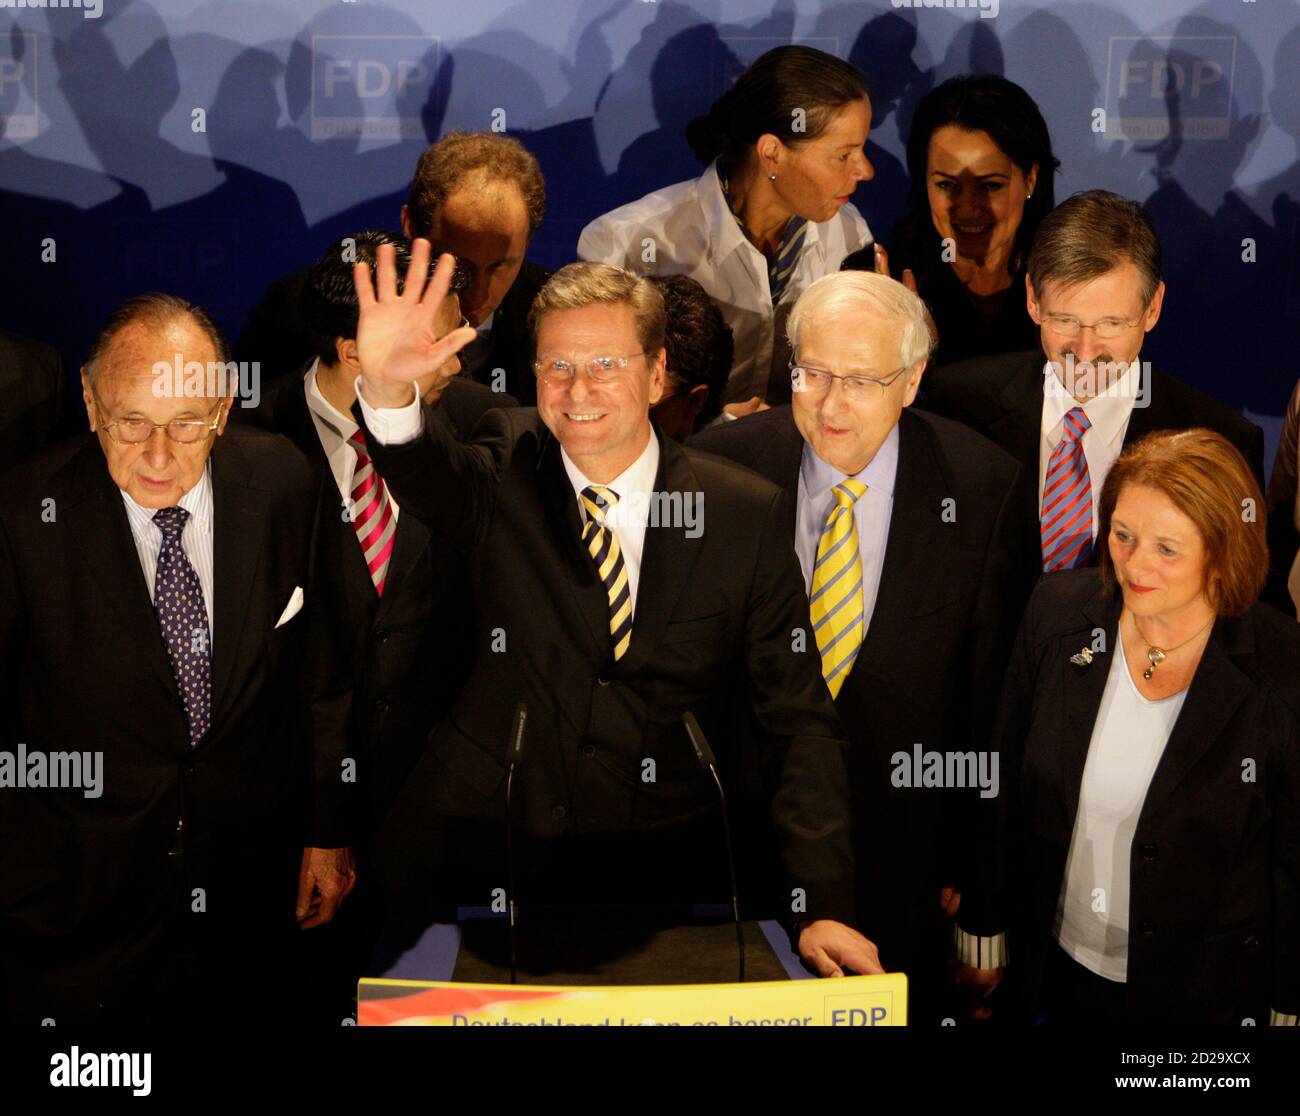 Former Foreign Minister Hans-Dietrich Genscher, Guido Westerwelle, leader of the pro-business Free Democratic Party (FDP), FDP deputy parliamentary leader Rainer Bruederle, Hermann Otto Solms and Sabine Leutheusser-Schnarrenberger (front row L-R) react after first exit polls in the German general election (Bundestagswahl) in Berlin September 27, 2009. REUTERS/Thomas Bohlen  (GERMANY POLITICS ELECTIONS) Stock Photo